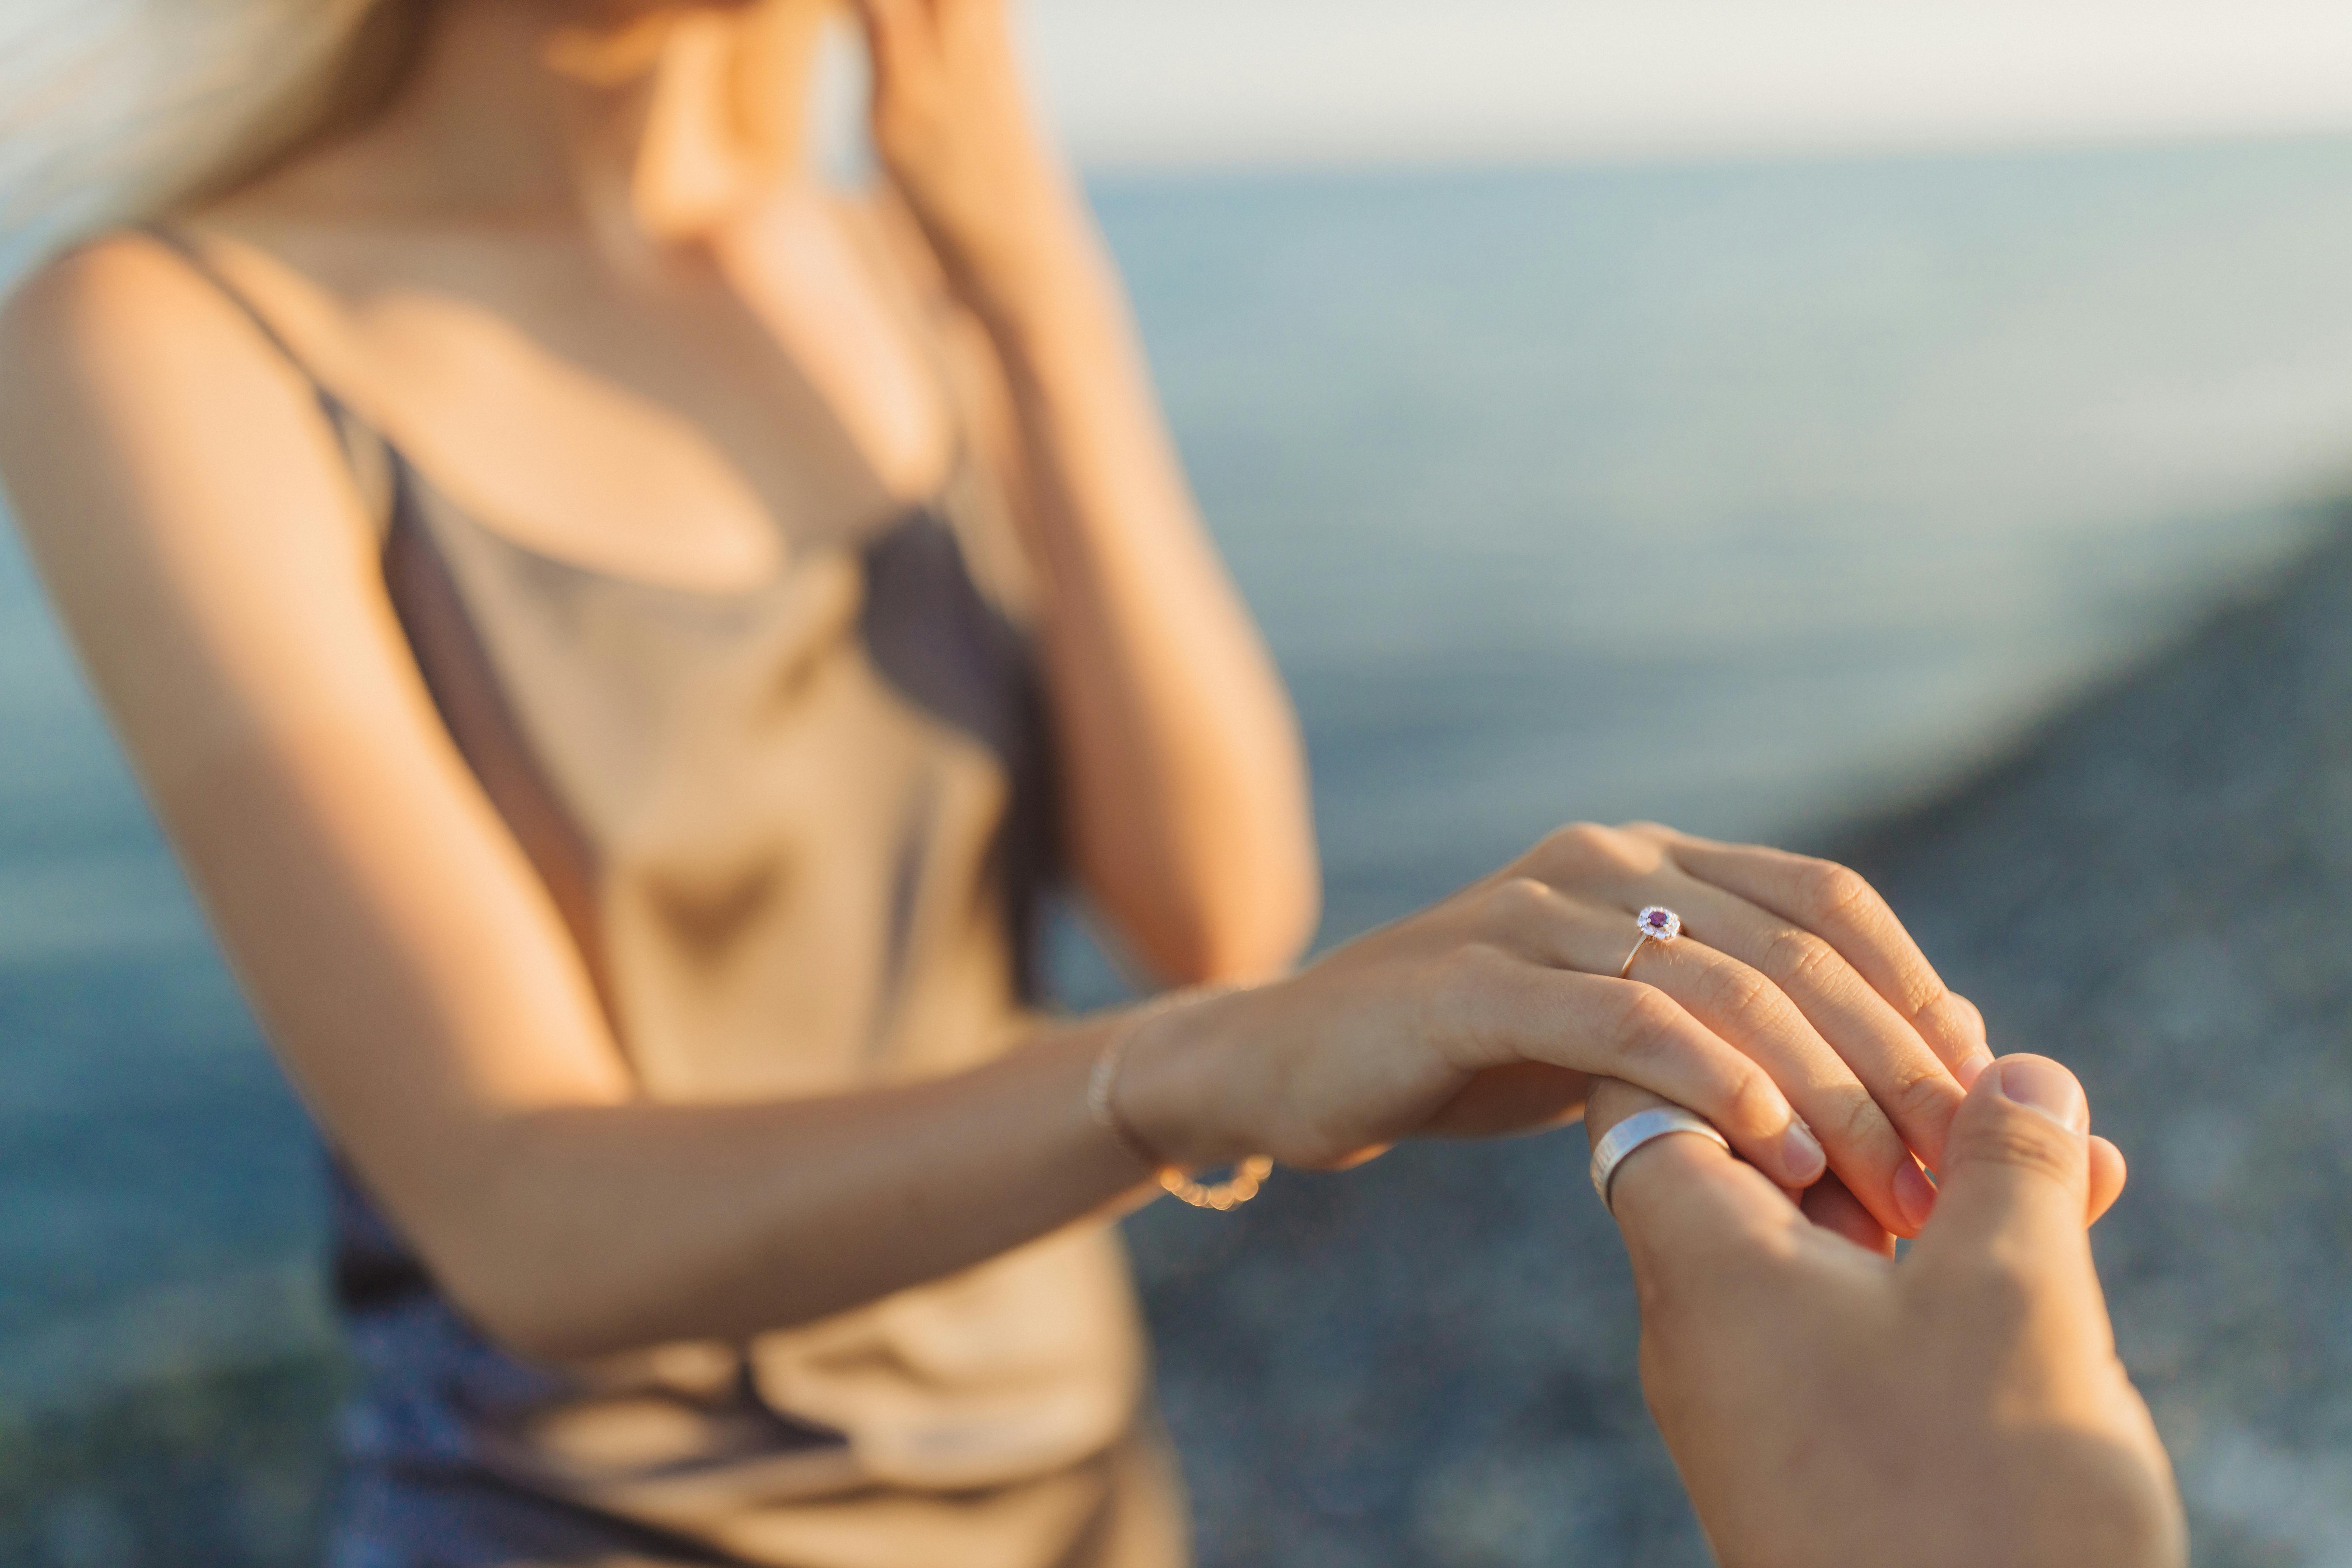 Proposal with a beautiful ring | Source: Pexels